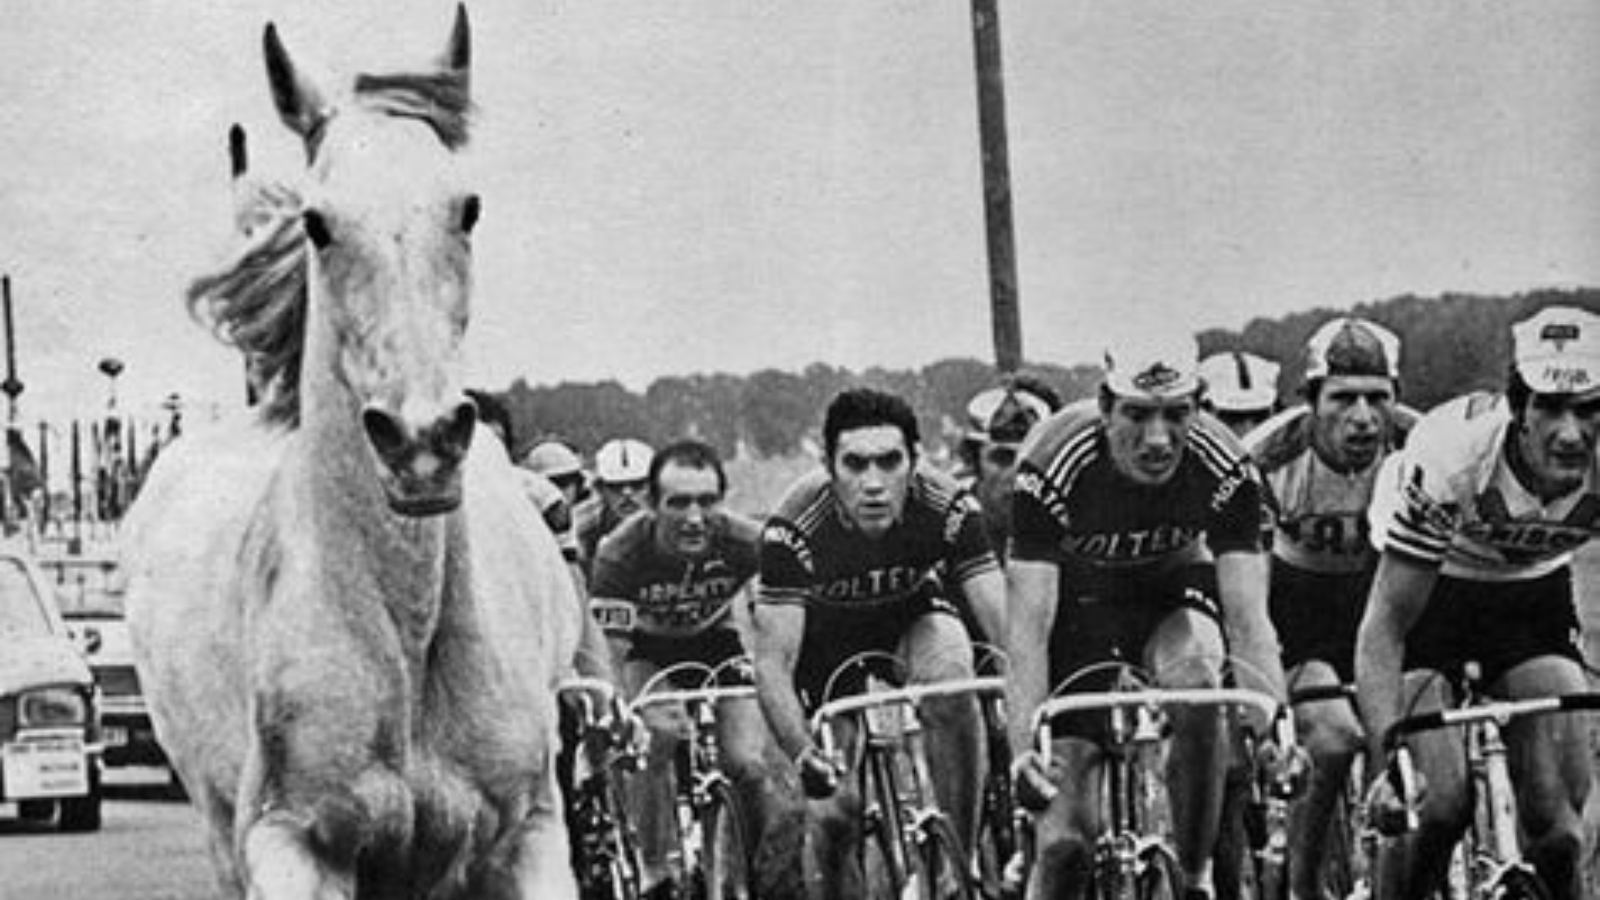 A horse is riding alongside with the peloton, including Eddy Merckx at the Tour de France 1975